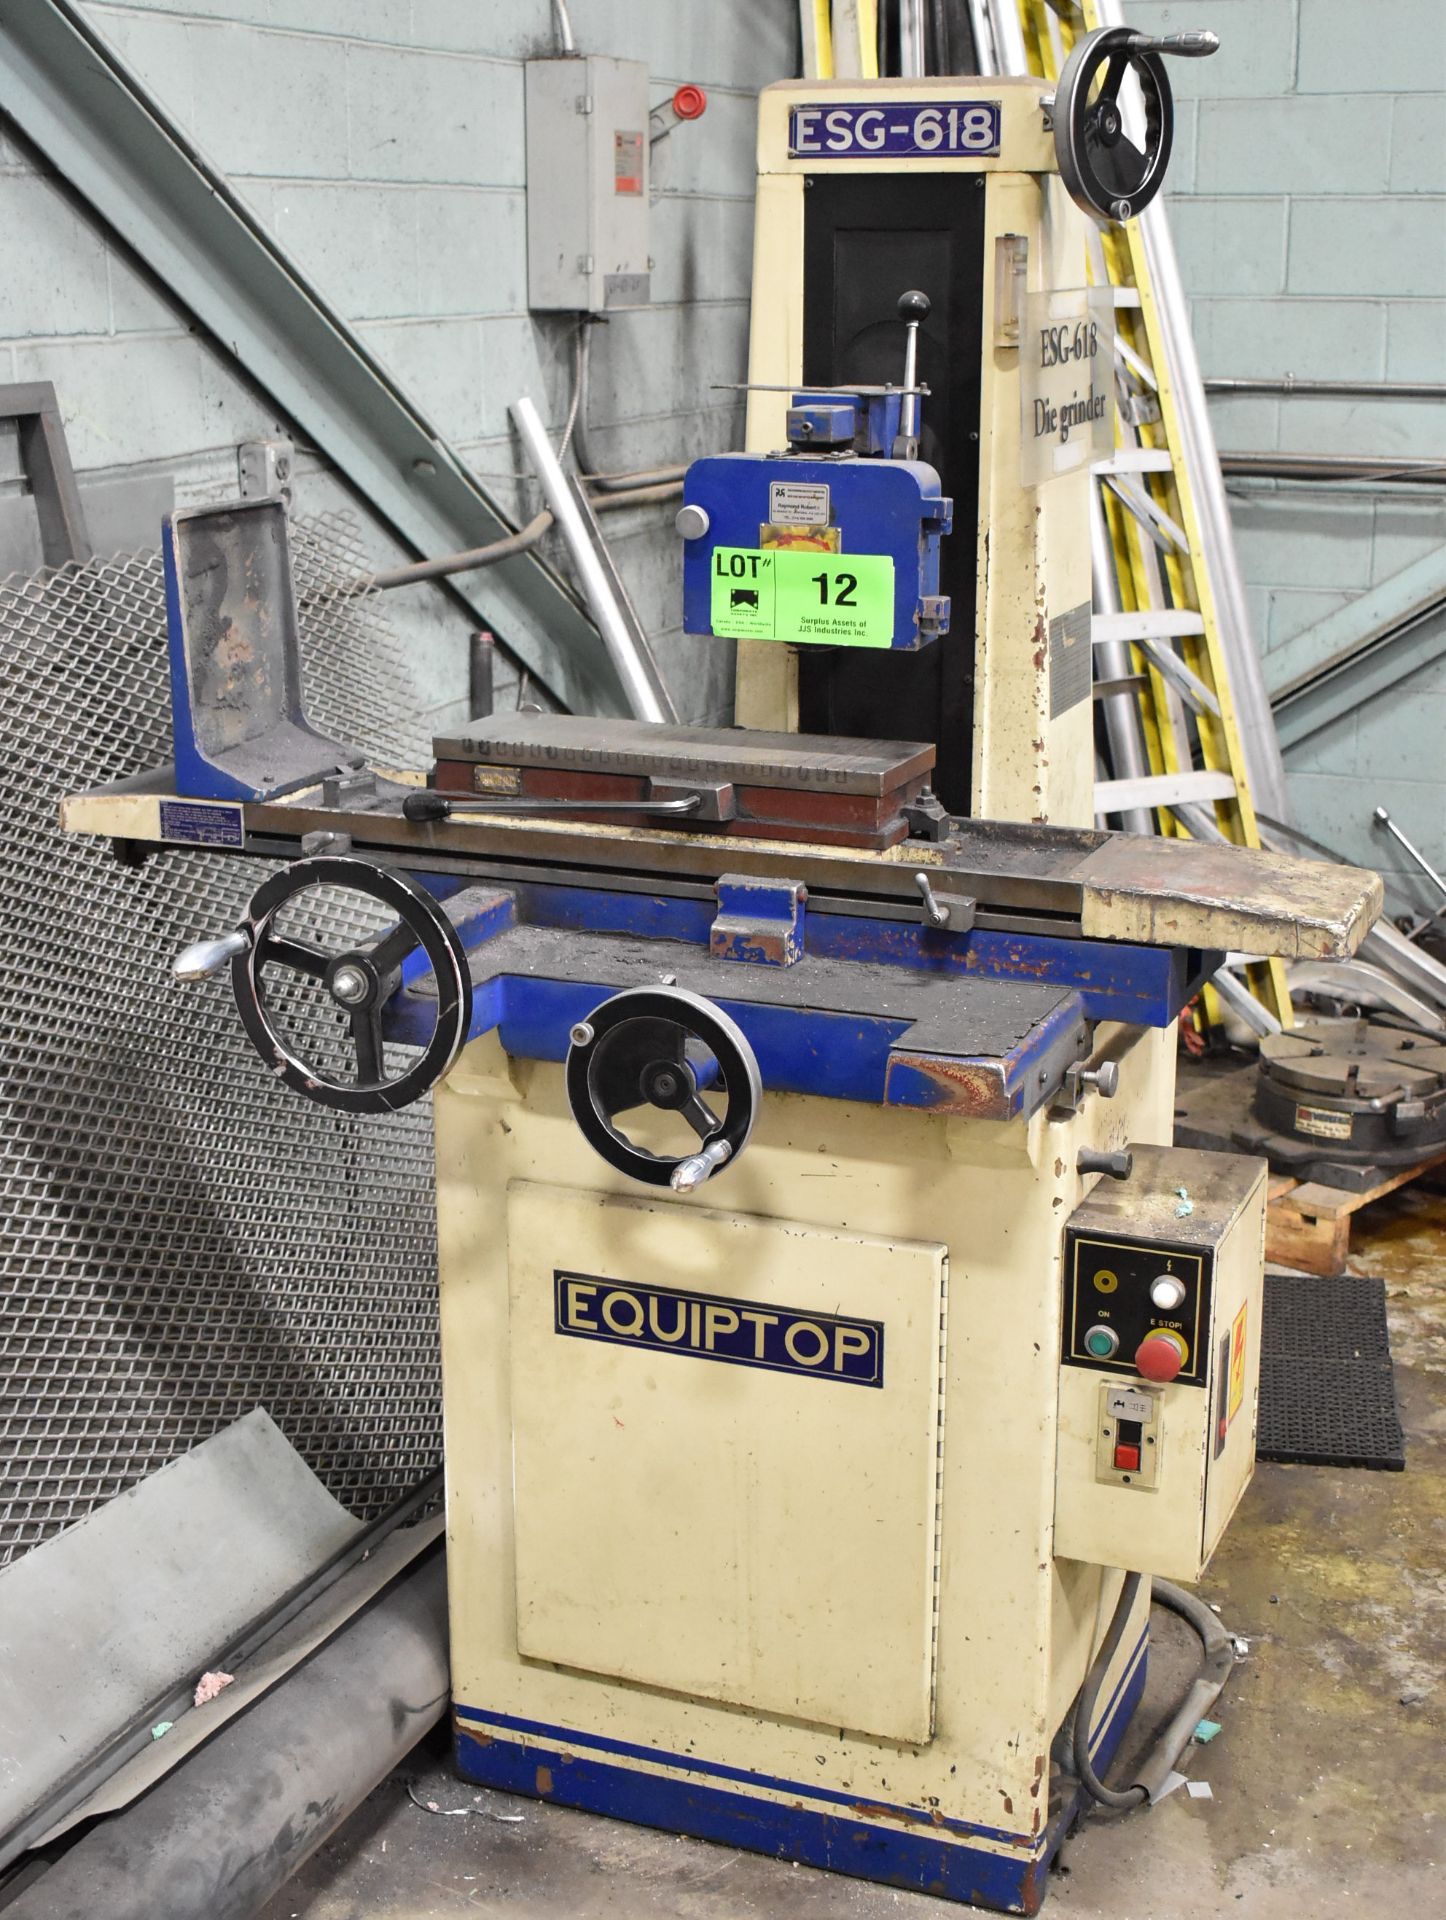 EQUIPTOP ESG-618 HYDRAULIC SURFACE GRINDER WITH 18"X6" ELECTROMAGNETIC CHUCK, 8" WHEEL, S/N: